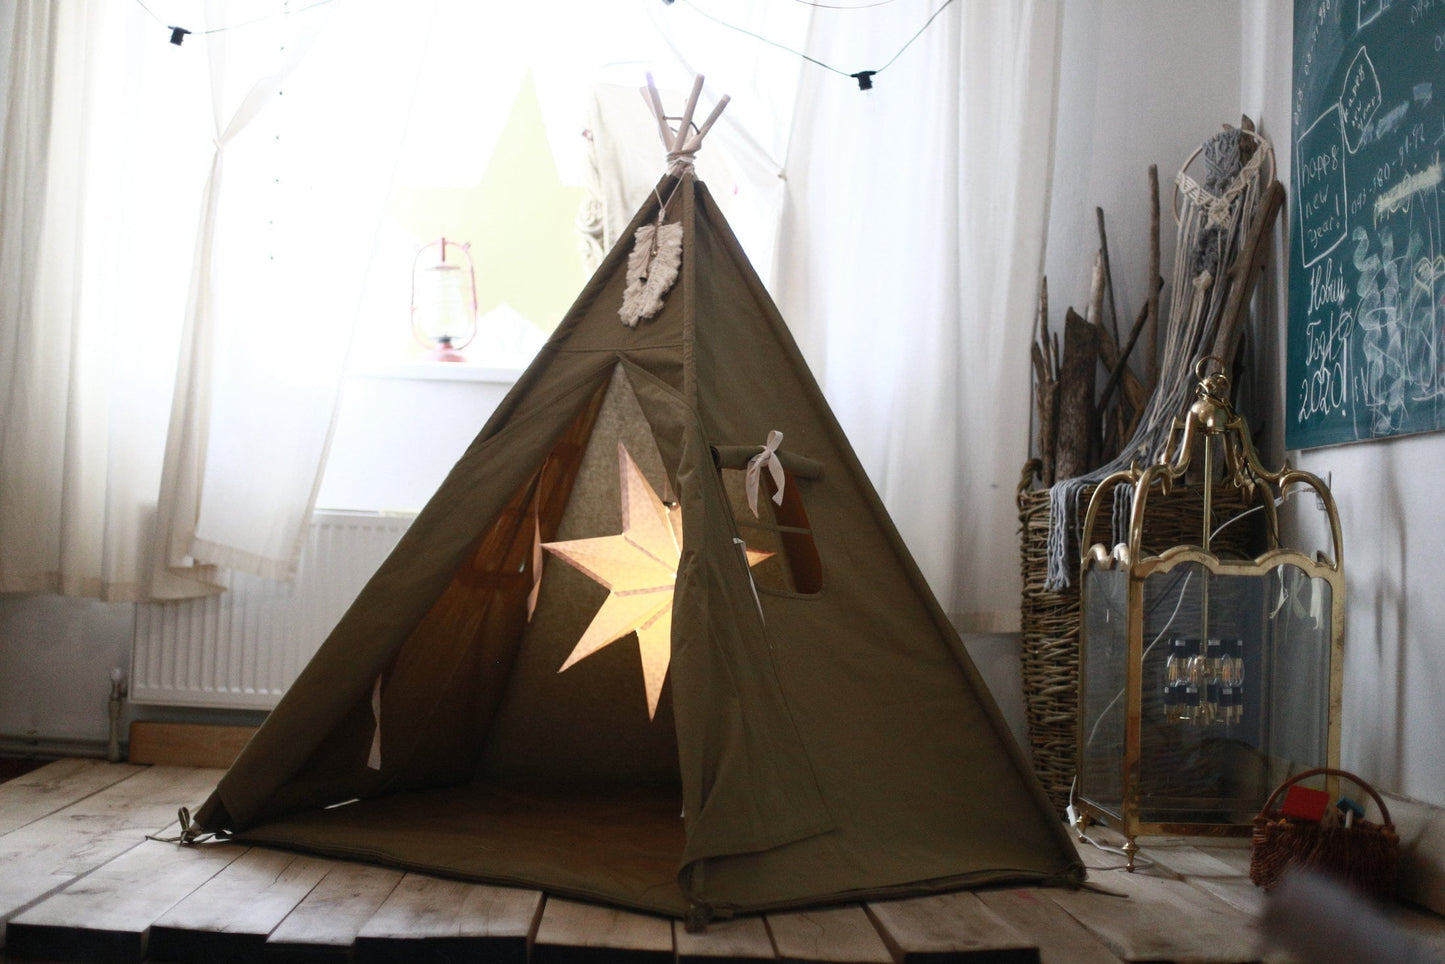 Indian Tent/Native American Teepee For Sale/Children'S Igloo Tent/Nomadic Teepee/Kids Playhouse Cottage - first Christmas